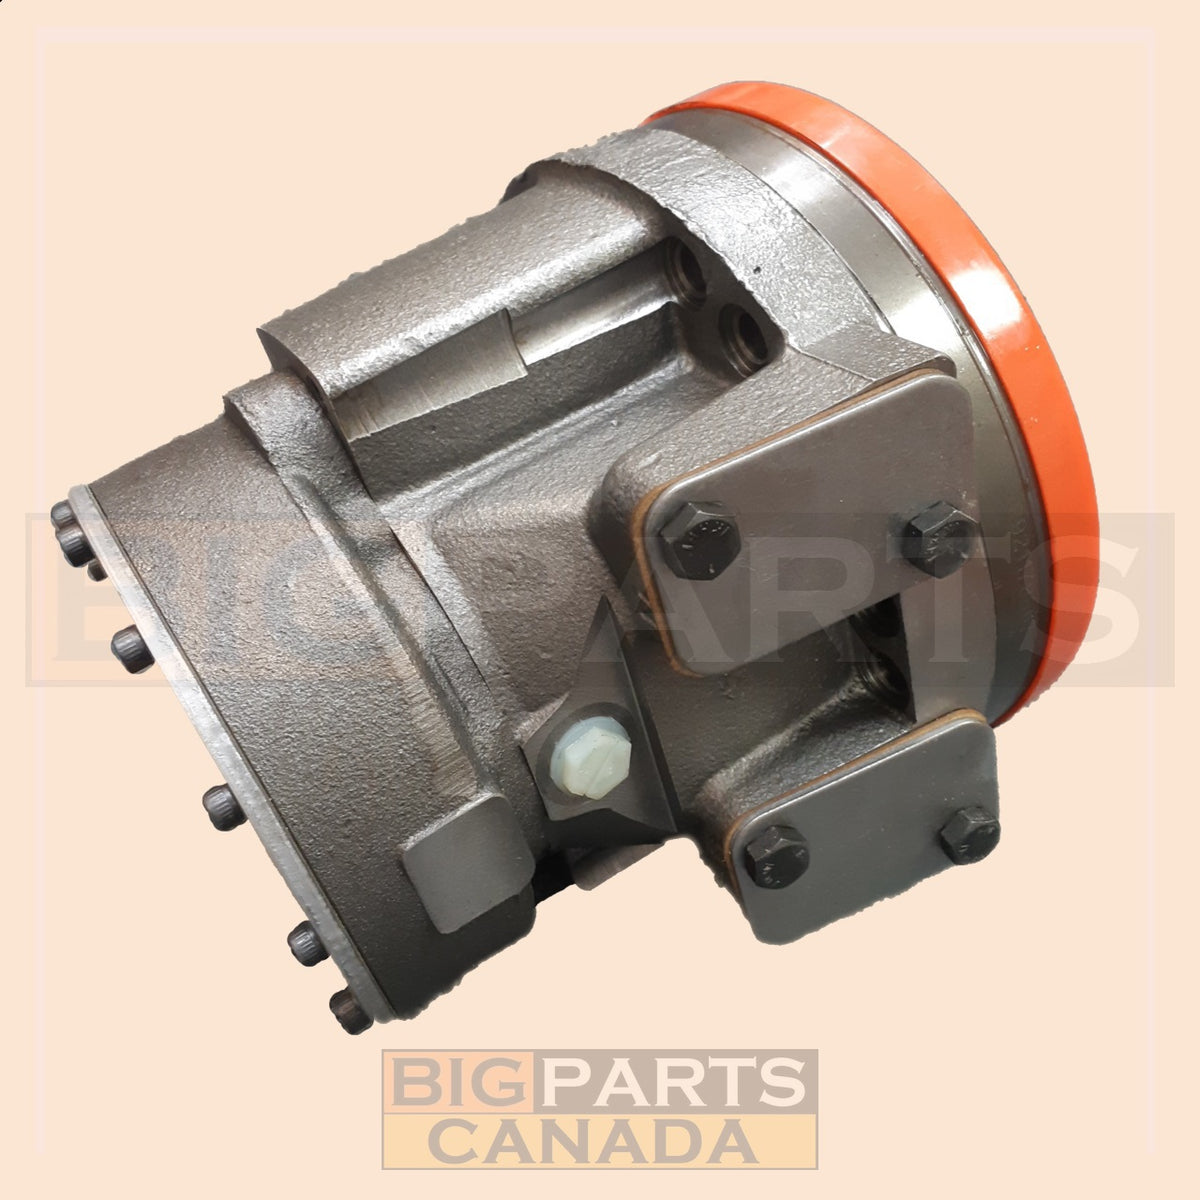 Hydraulic Final Drive Motor, 2-Speed, 7261340, 6687826 for Bobcat S220,  S250, S300